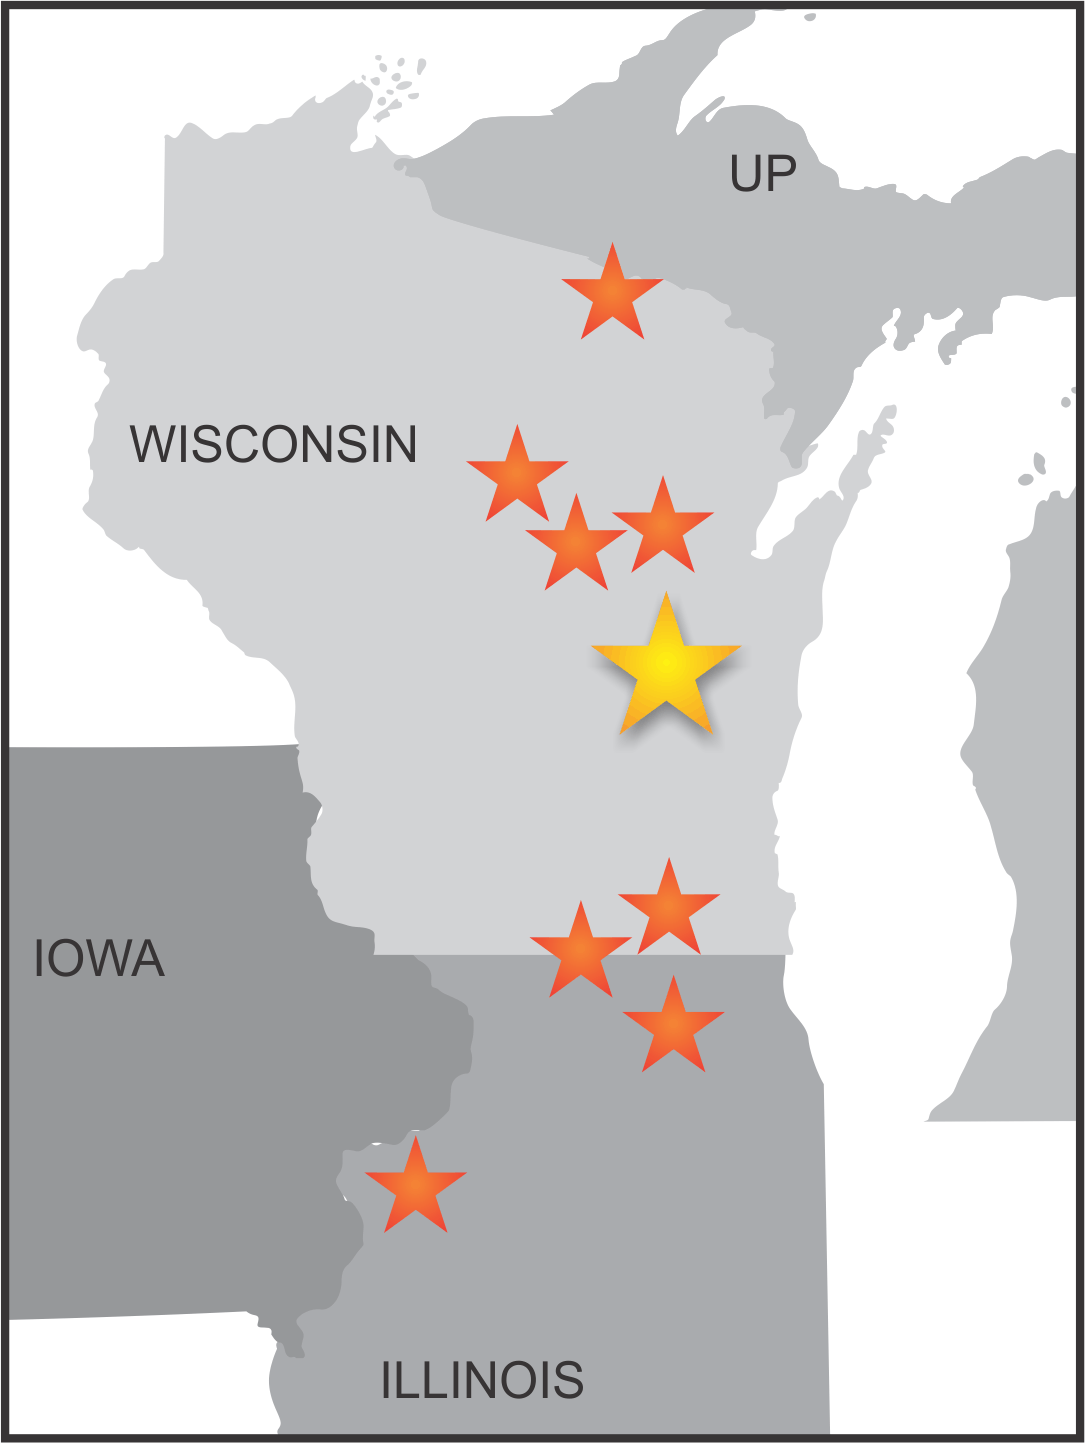 locations around the state